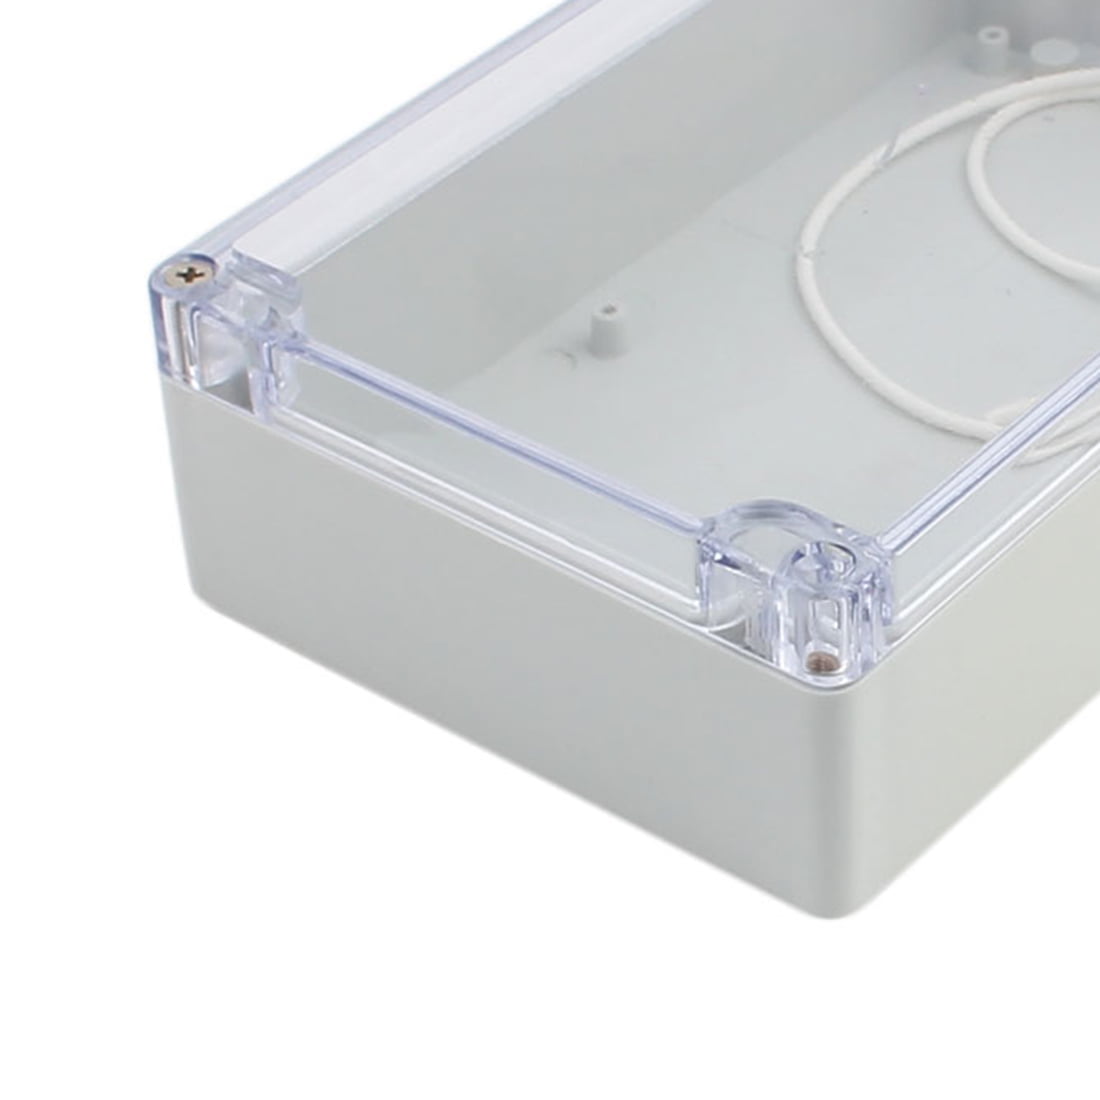 Tool Electronic Project Box Waterproof Case Durable Cable Junction Clear Cover